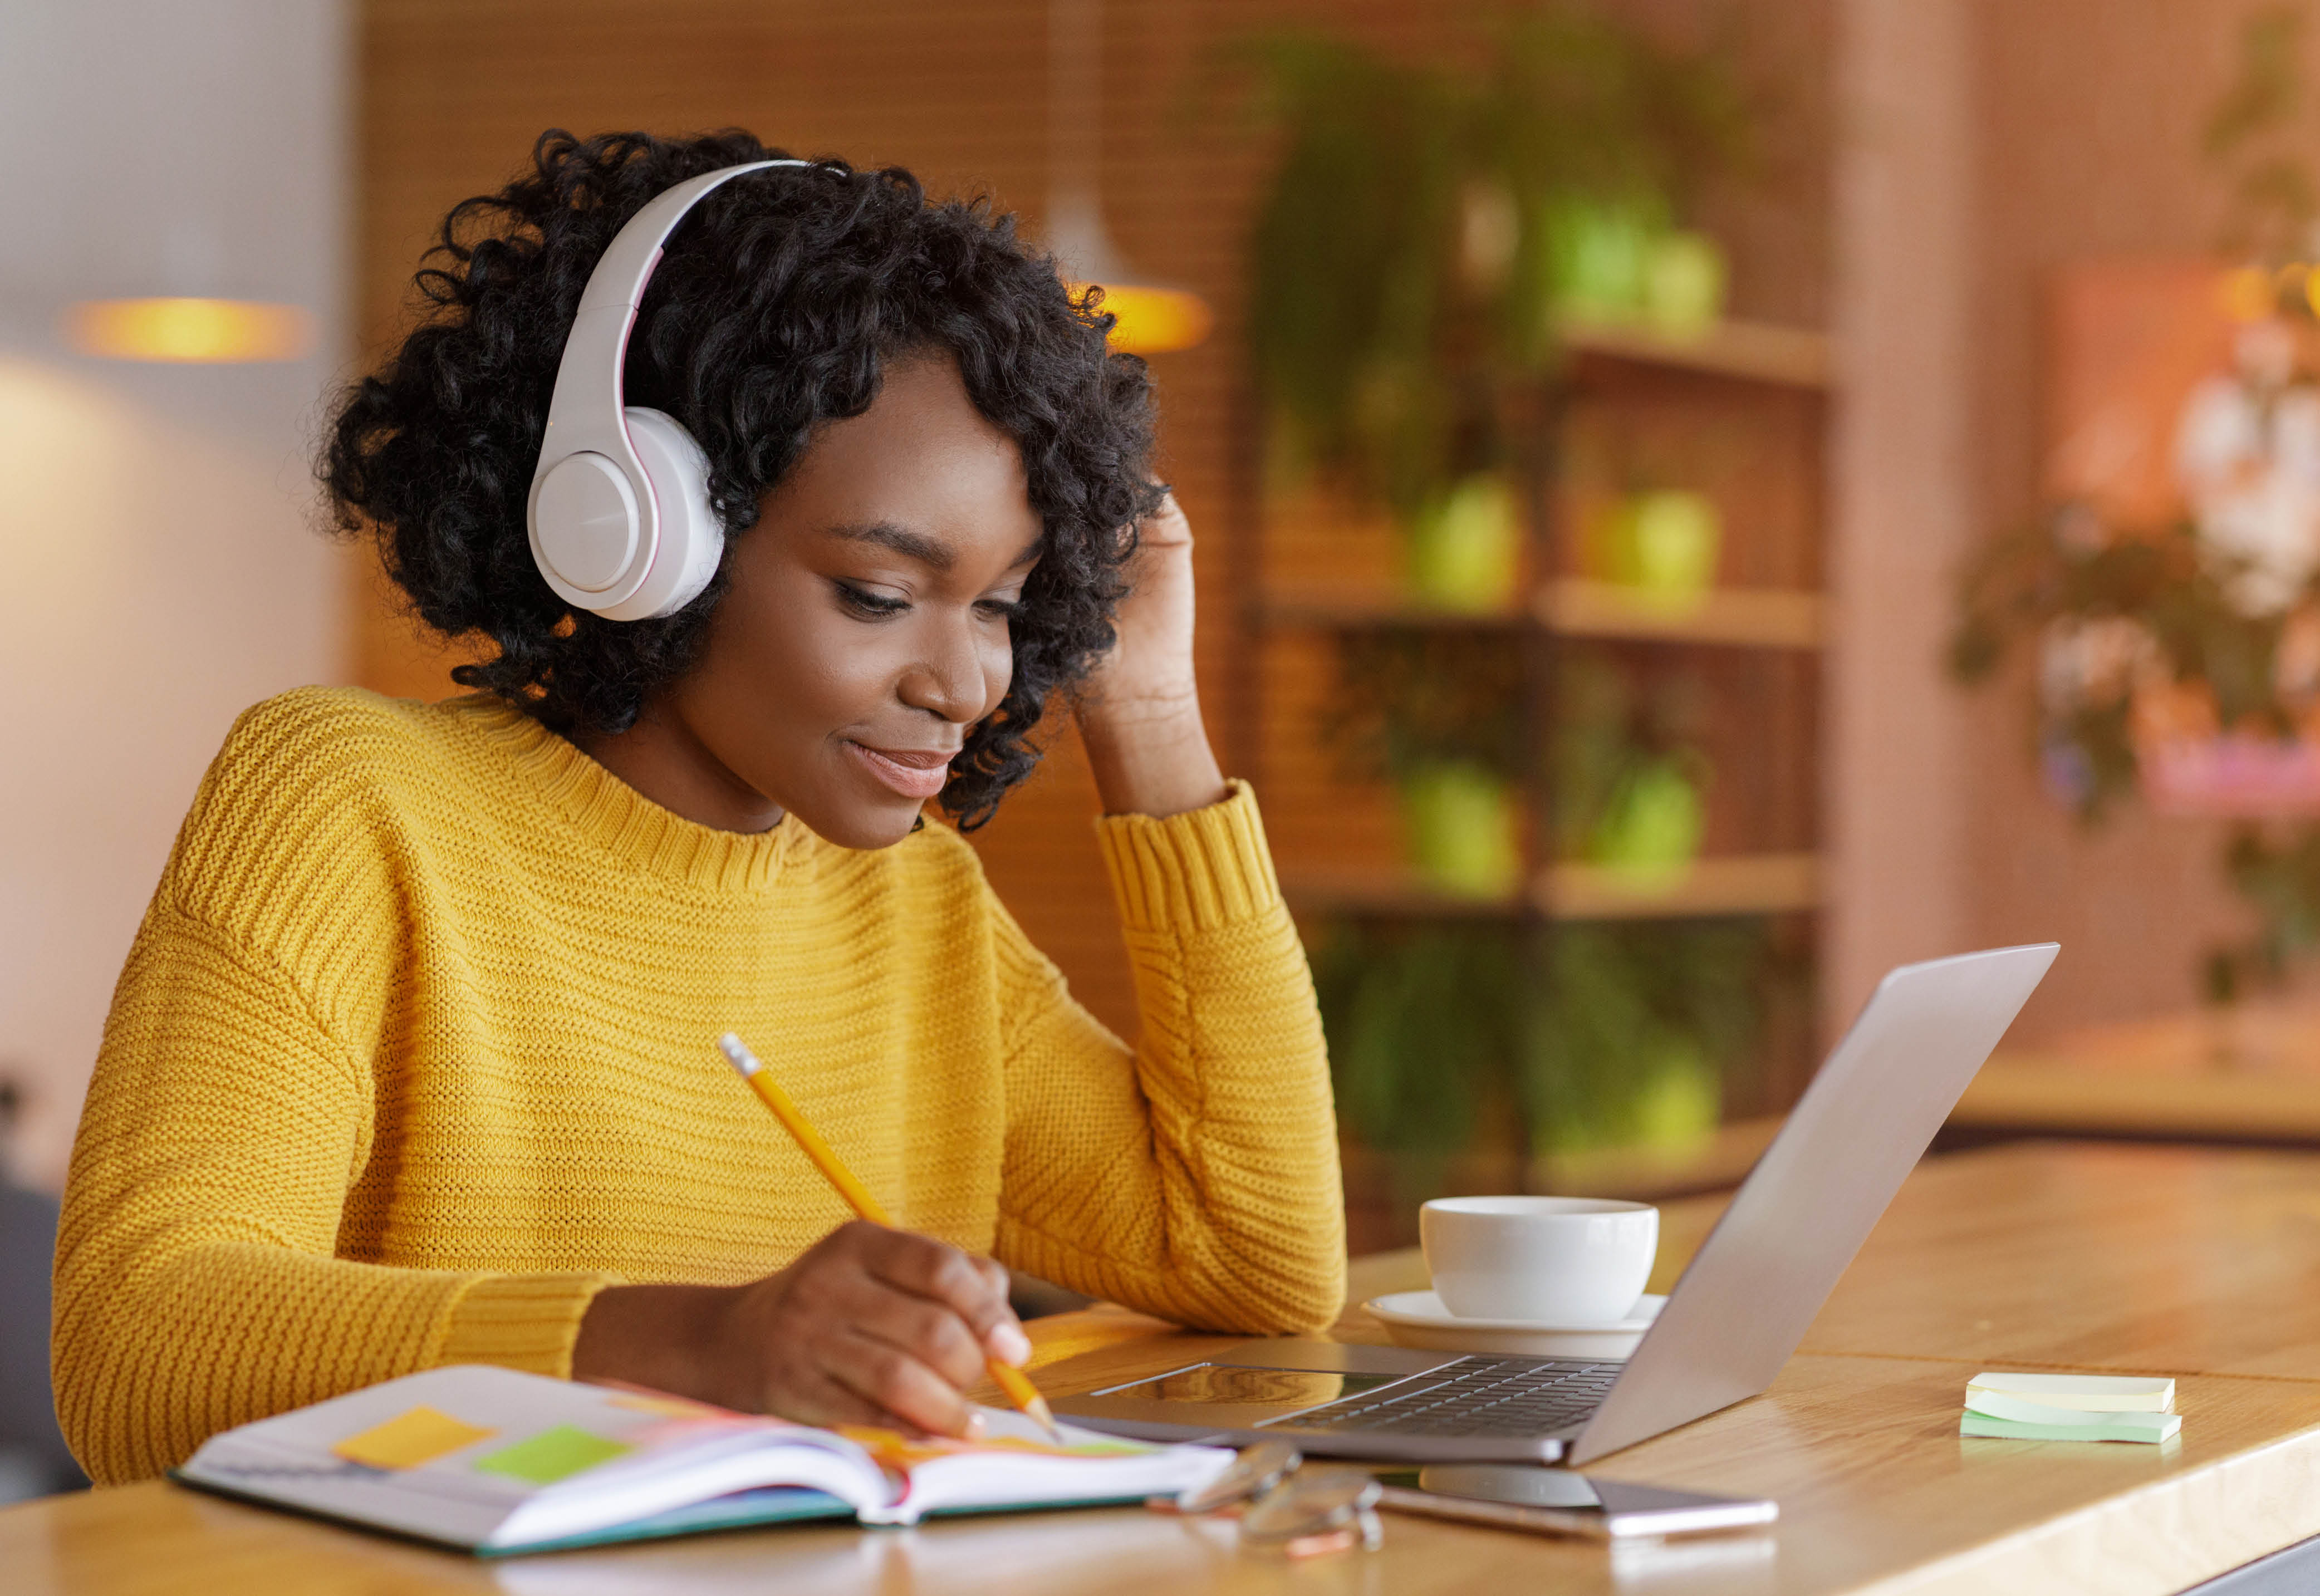 Woman wearing headphones sitting with her laptop and notebook open